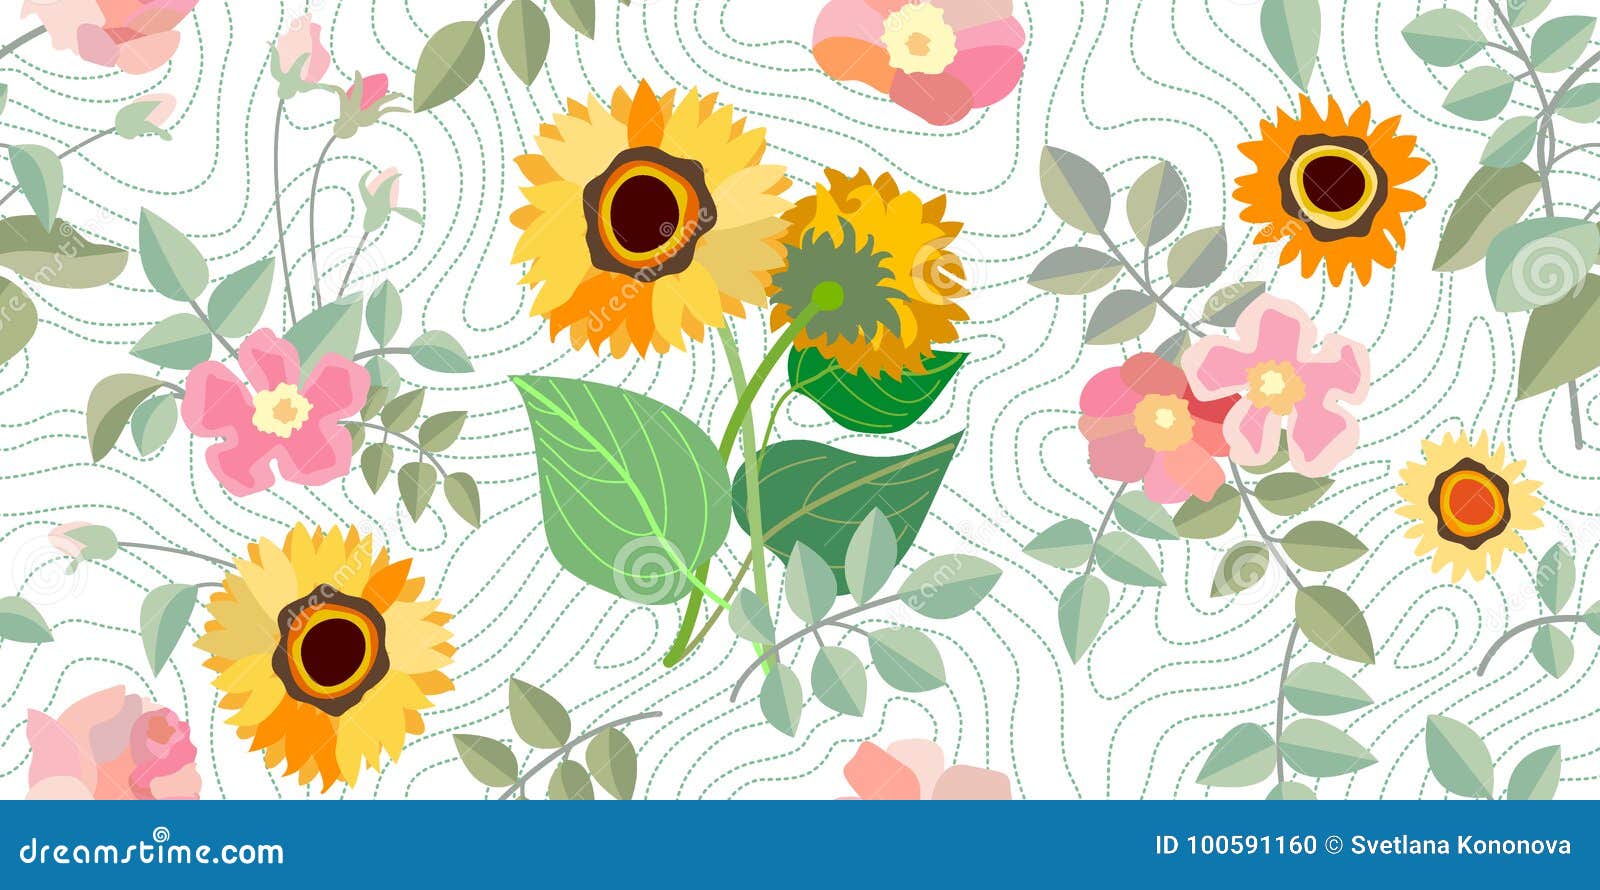 Download Autumn Roses And Sunflowers. Stock Vector - Illustration ...